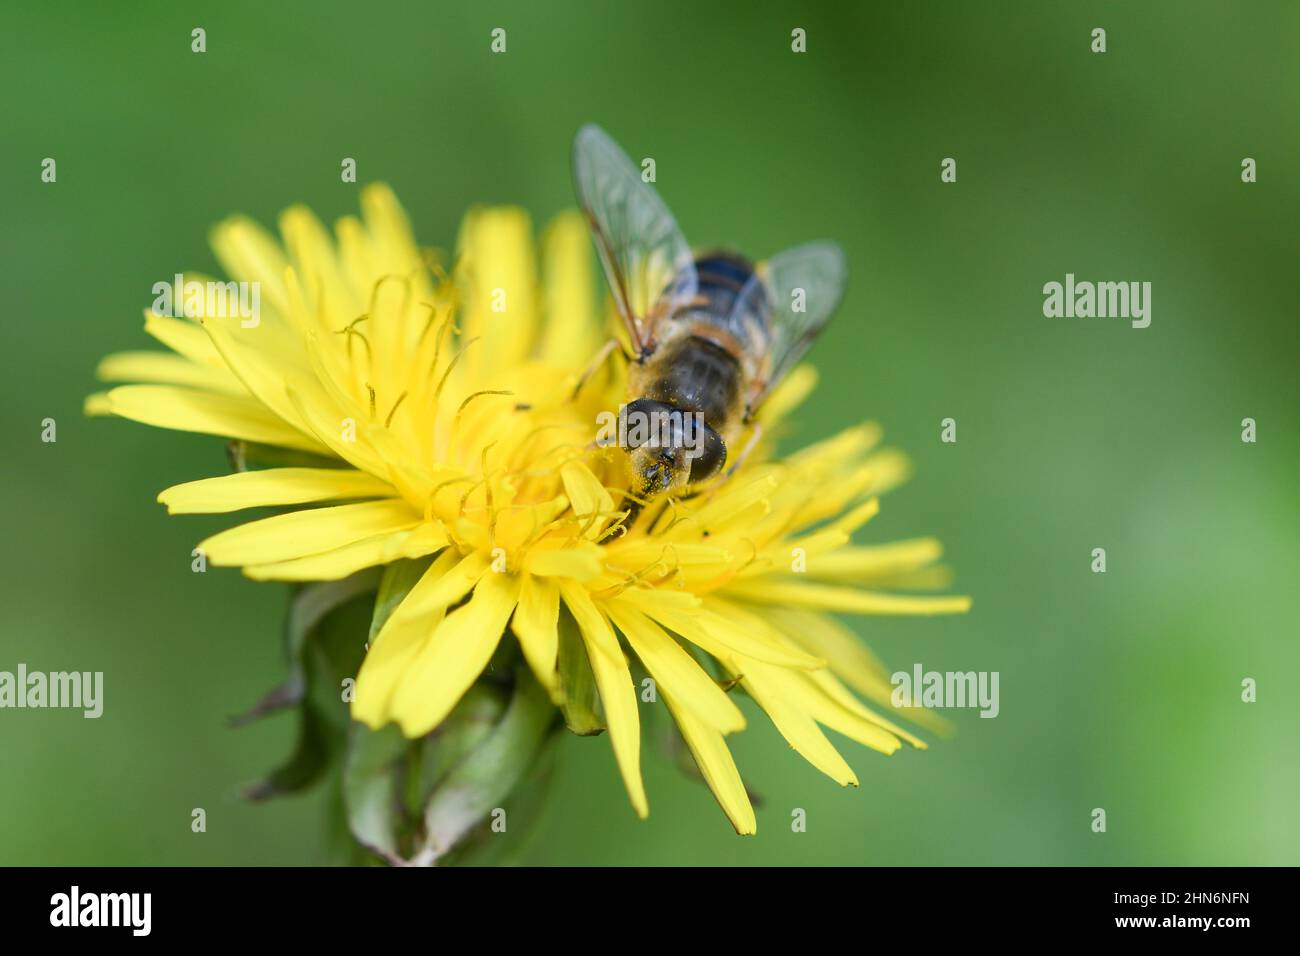 Close-up of a hover fly feeding on a dandelion flower Stock Photo